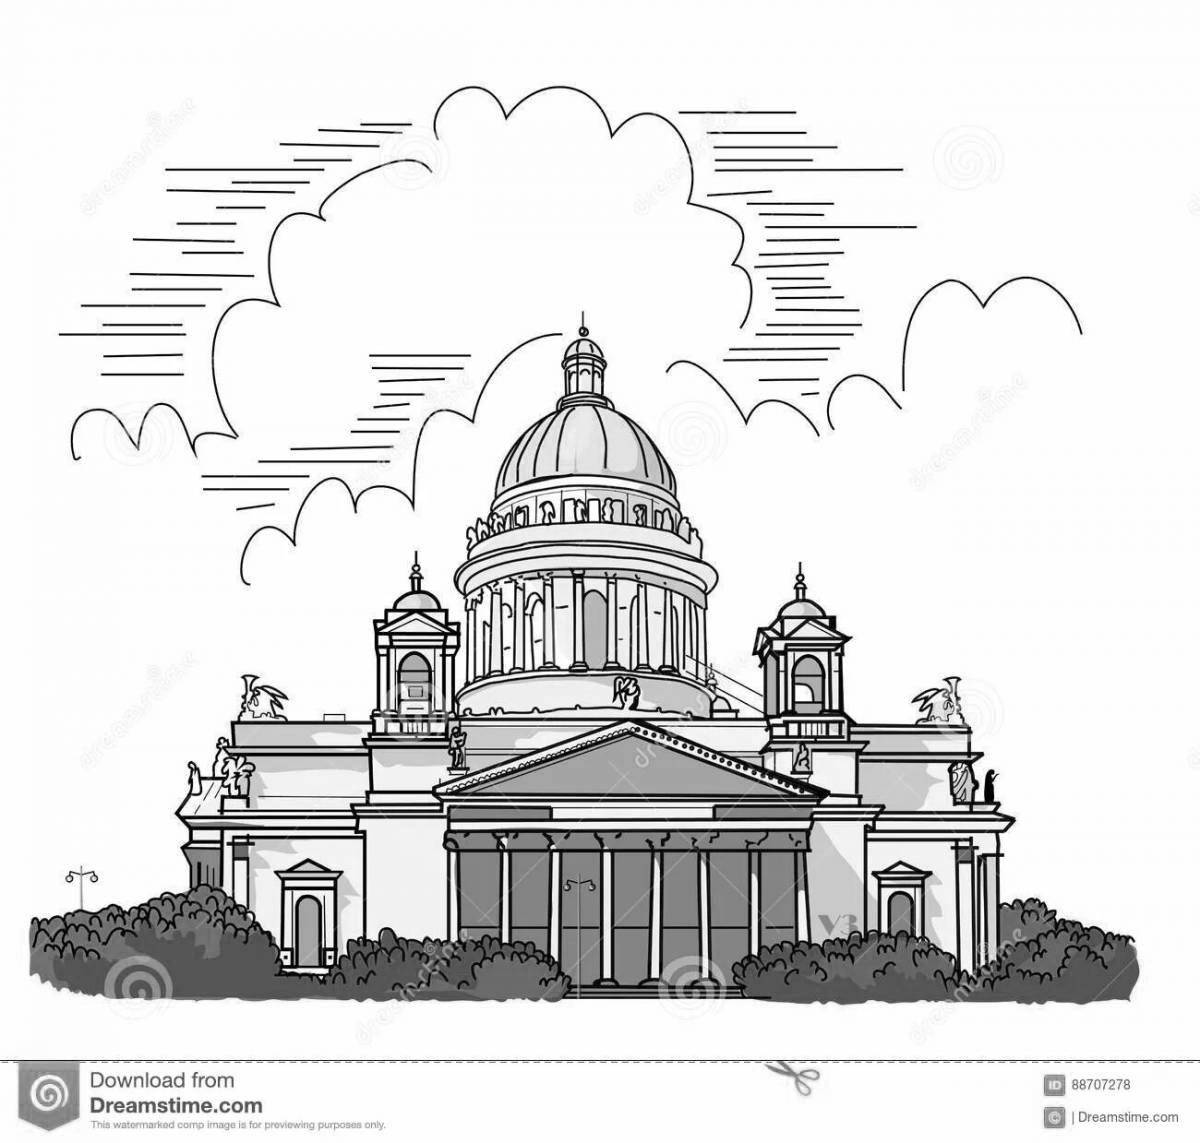 Merry Kazan Cathedral coloring pages for kids